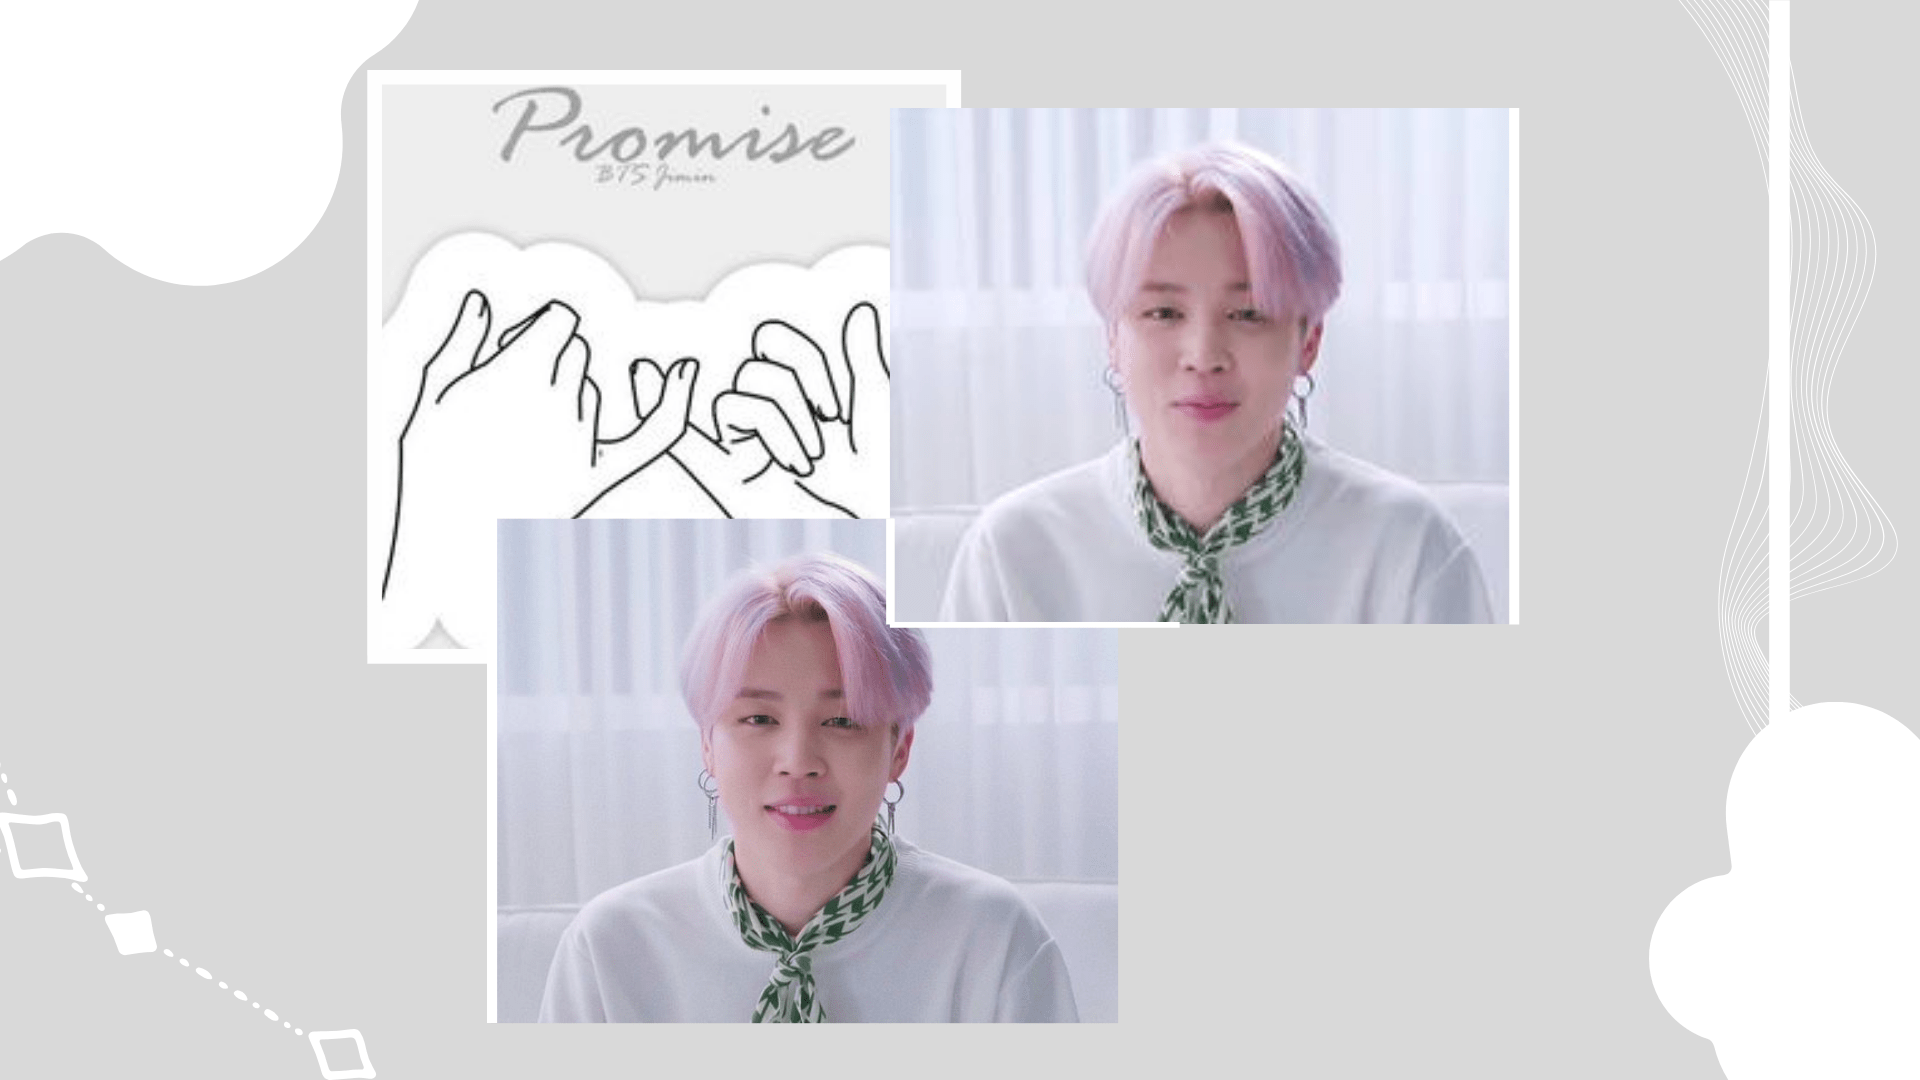 A collage of images of Jimin with the Promise title card - Jimin